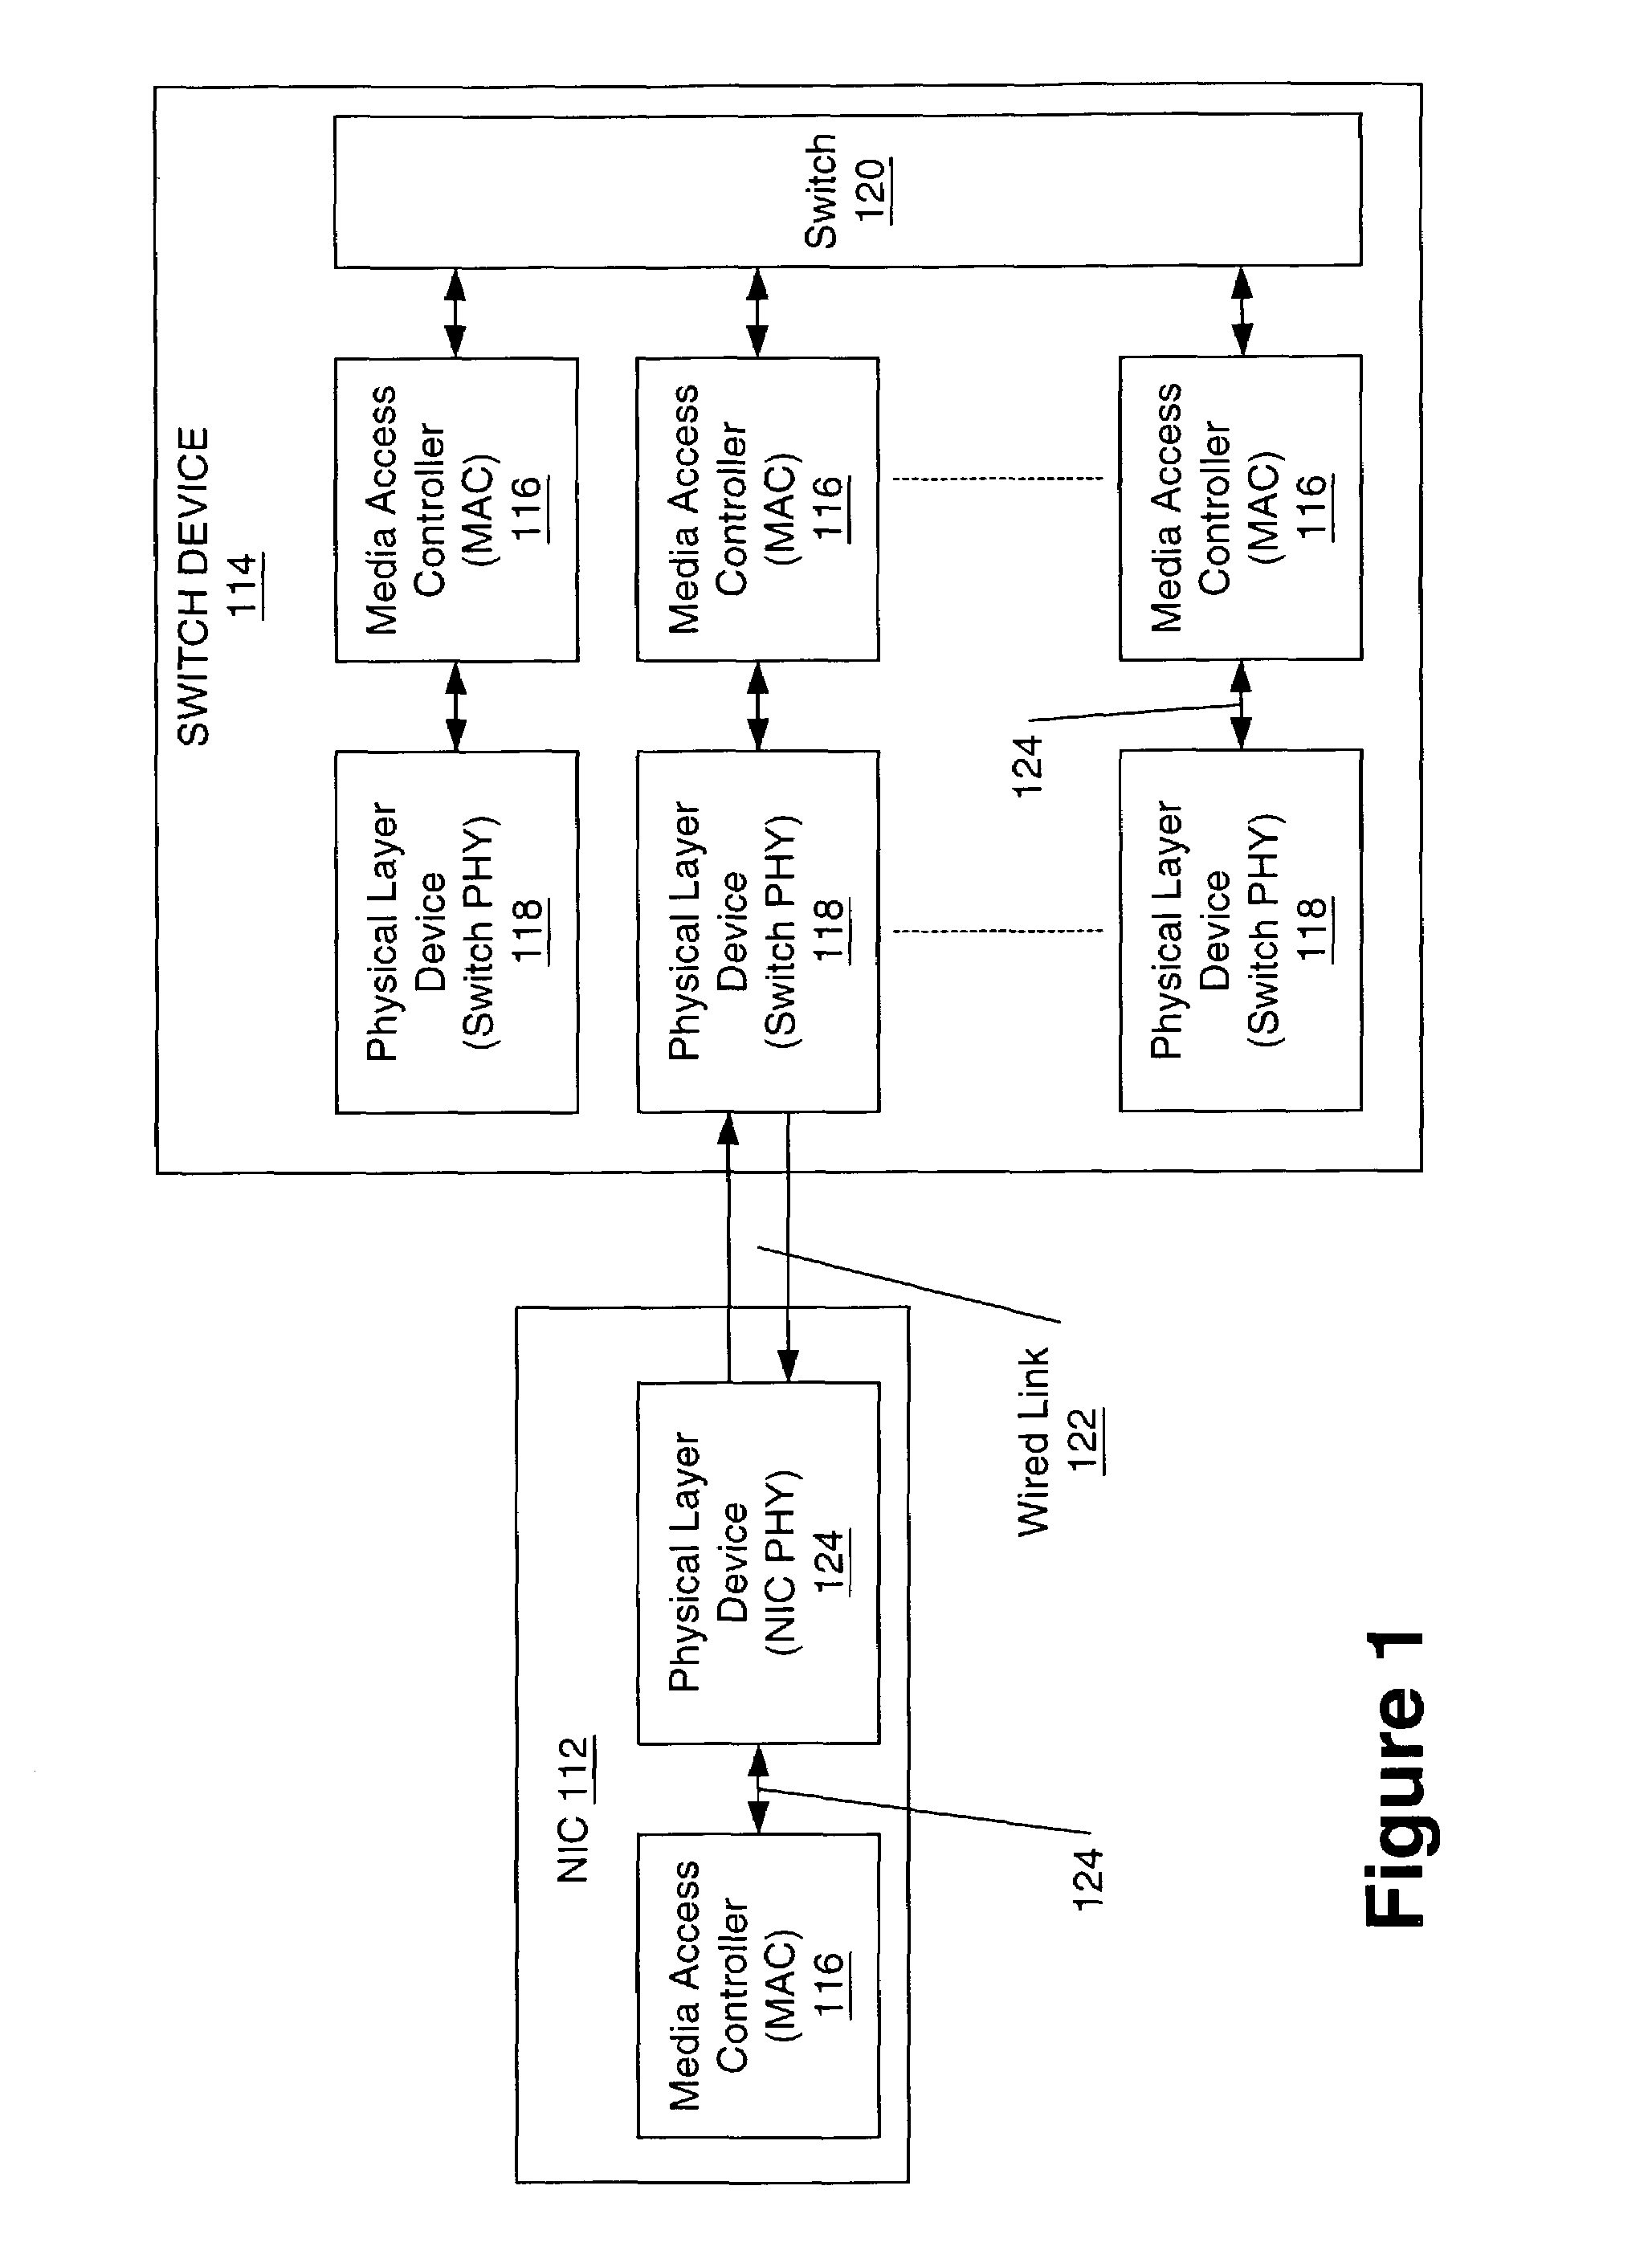 Apparatus and method for freezing the states of a receiver during silent line state operation of a network device